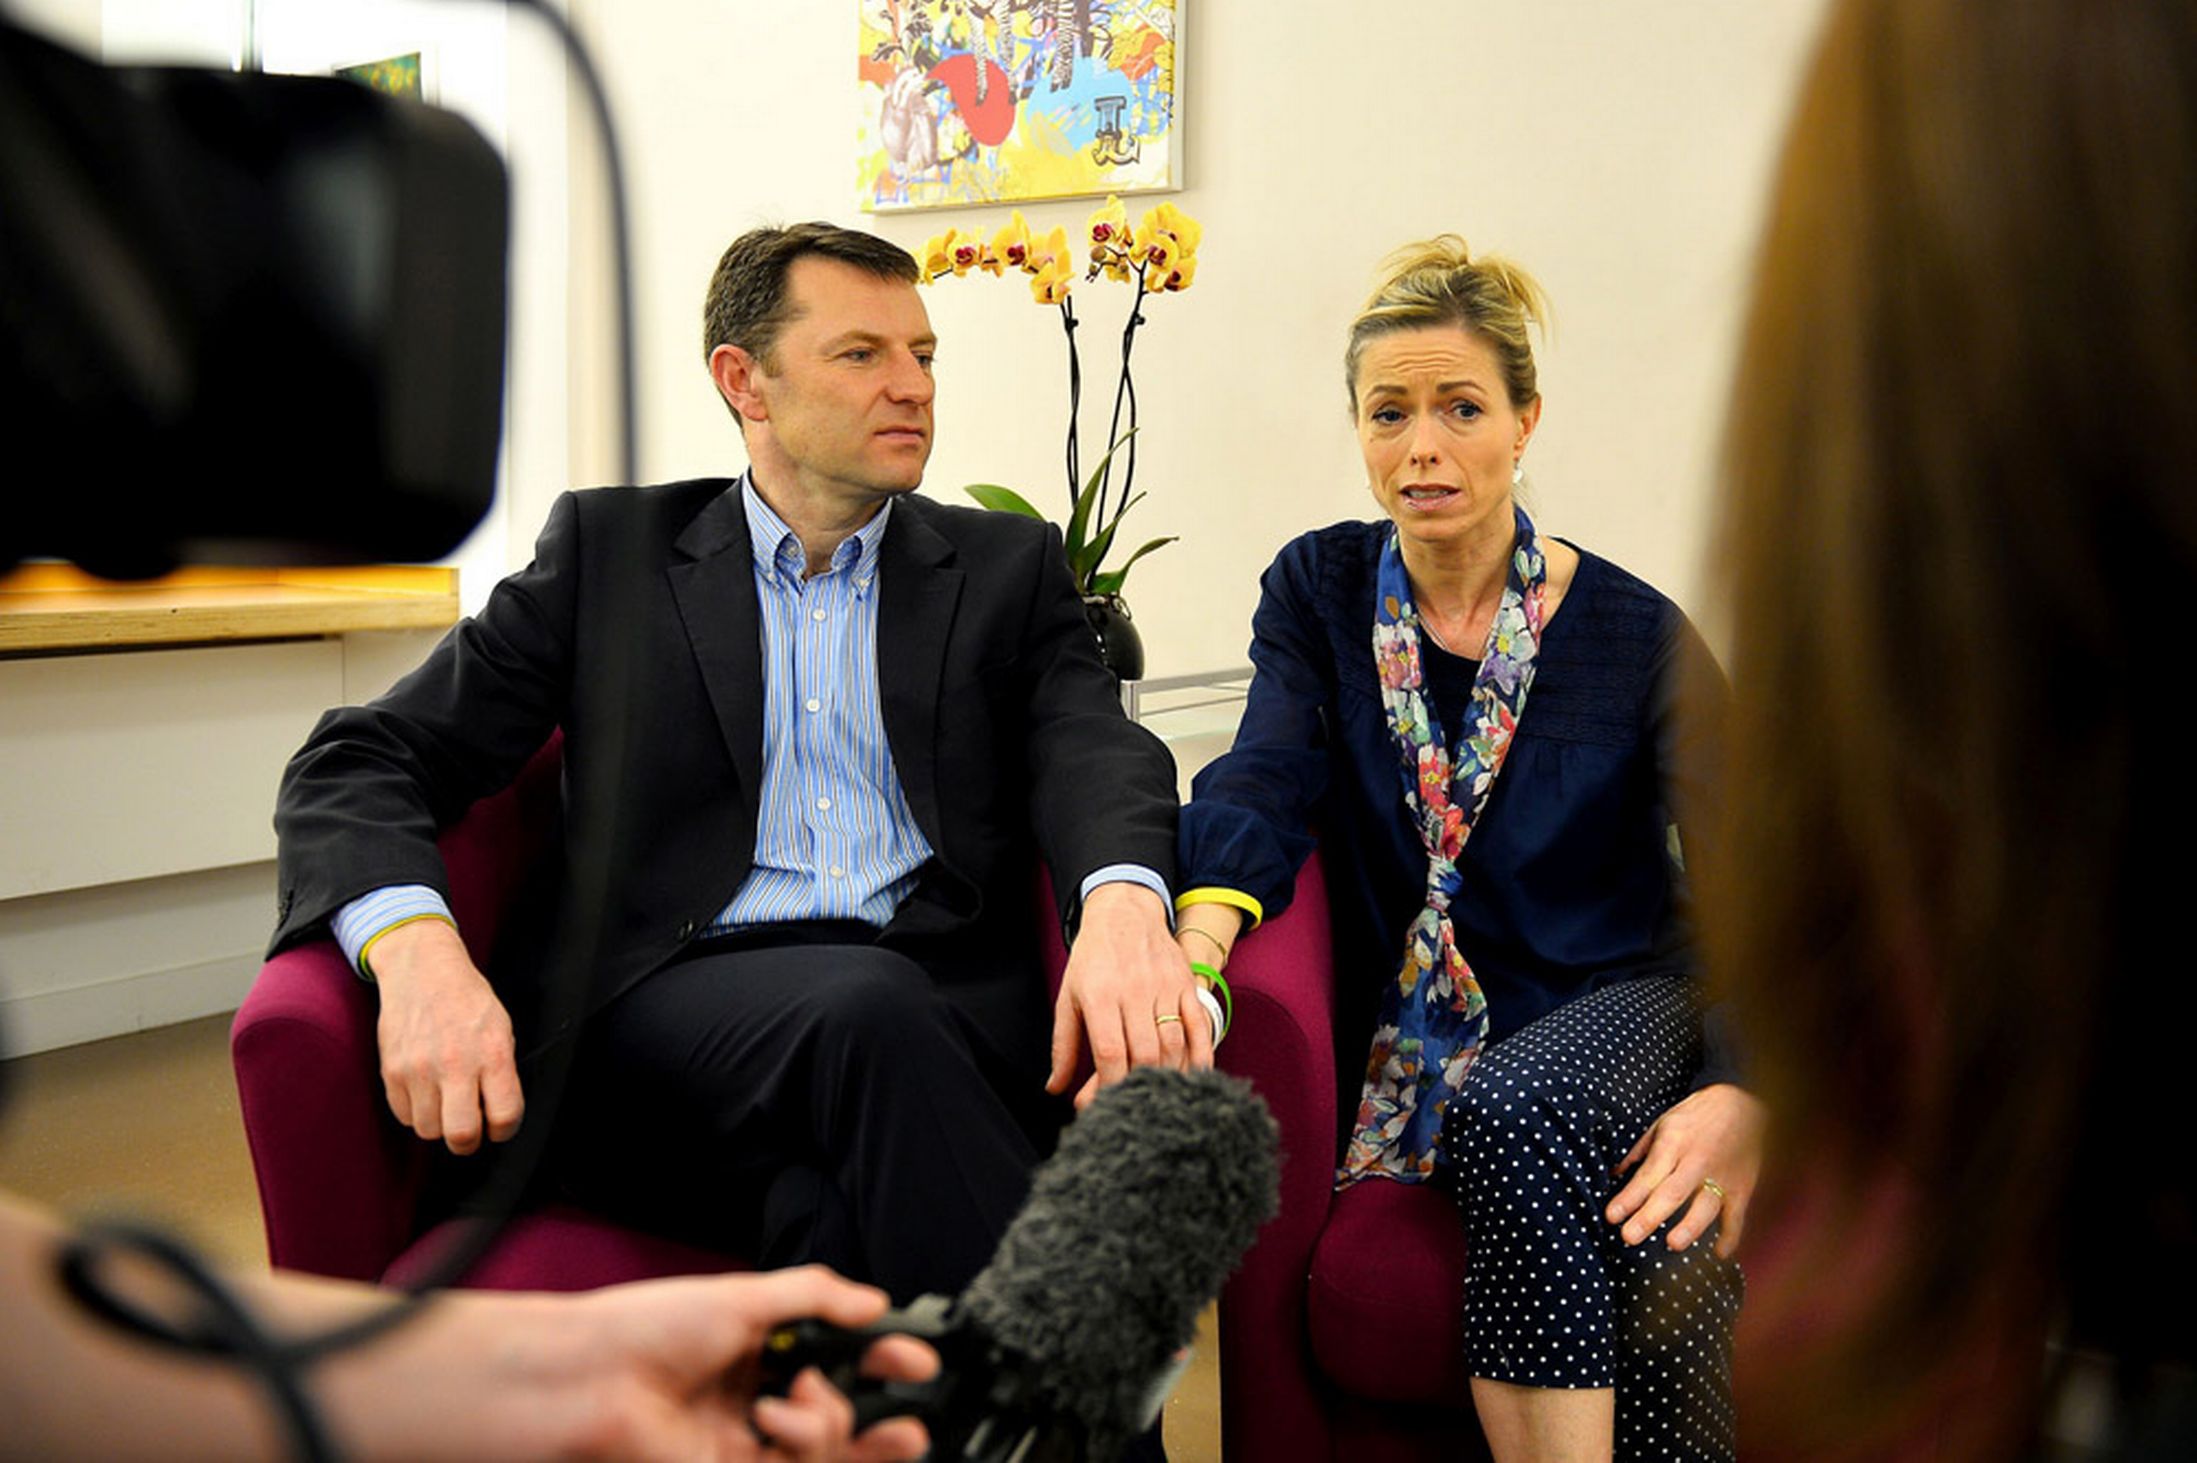 1st May 2013: Kate and Gerry McCann renew their appeal for help in finding missing Madeleine.